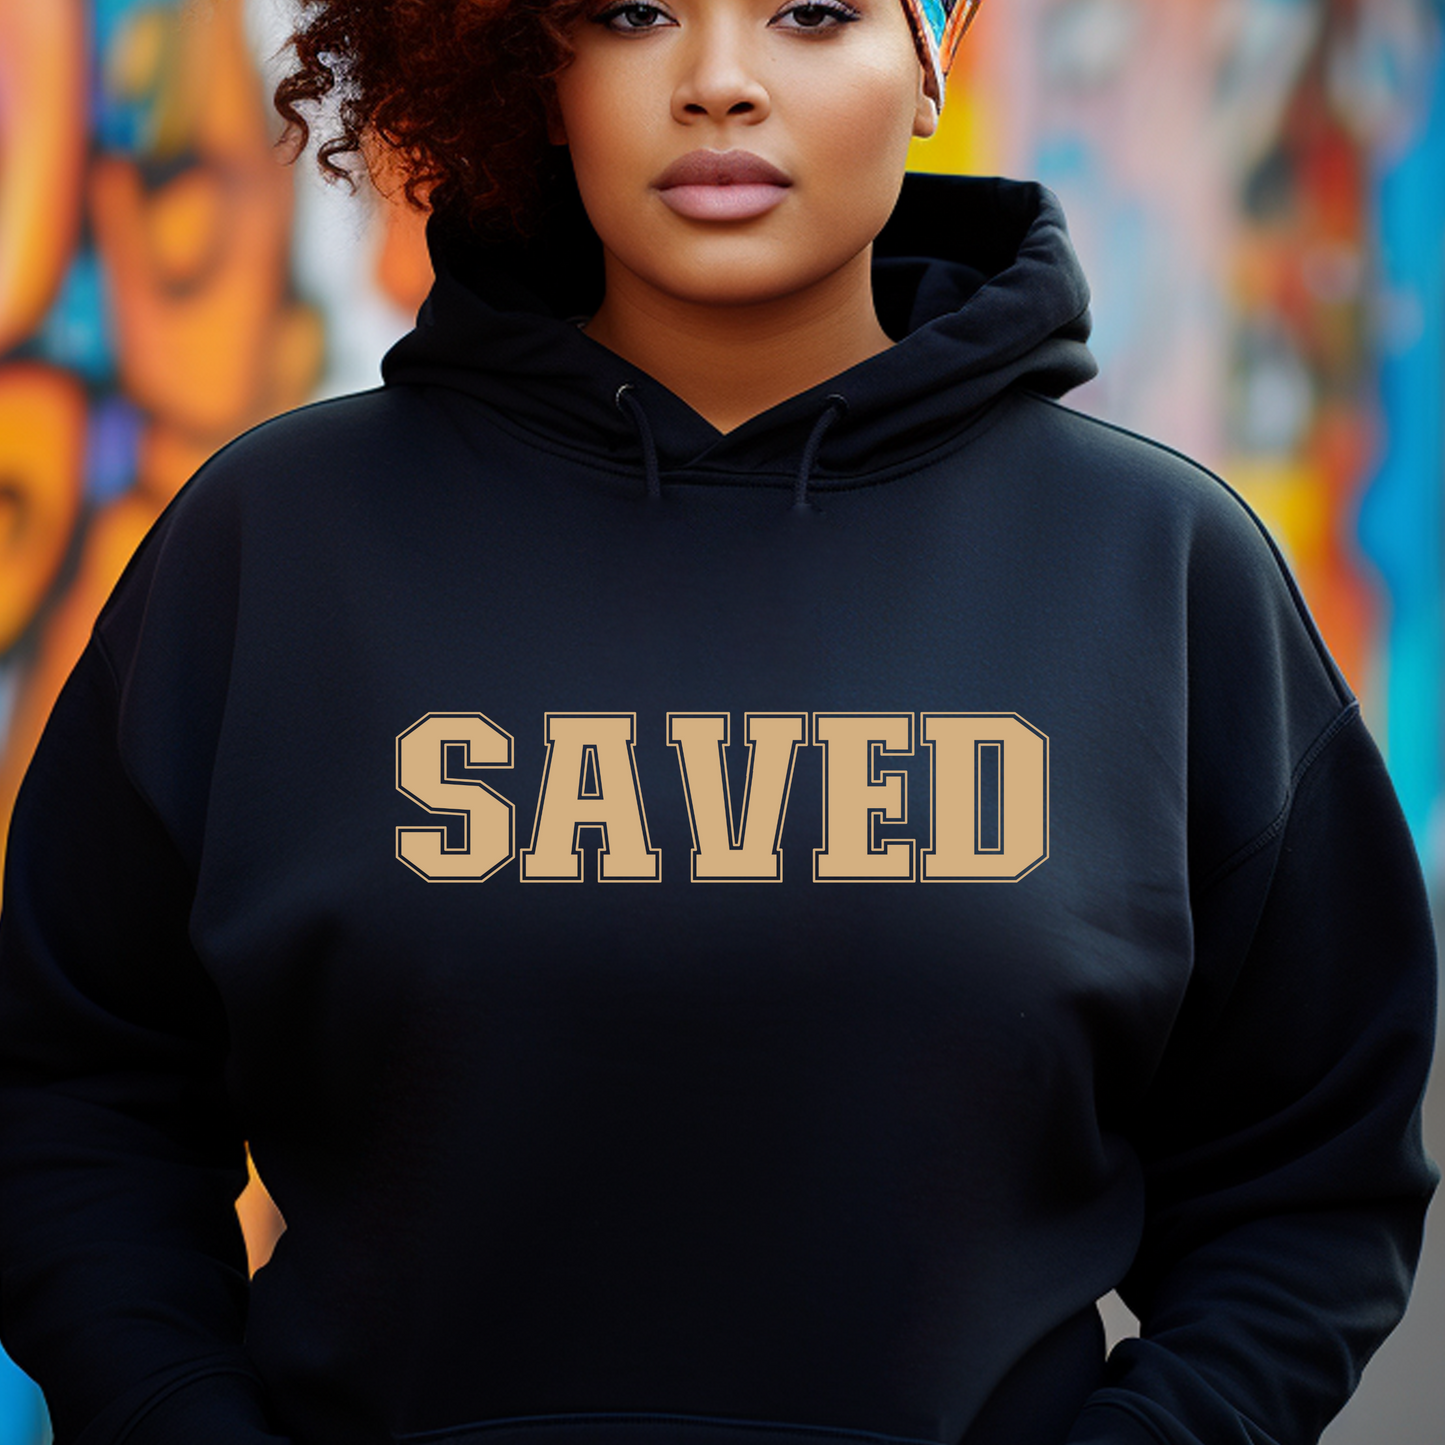 Shop Triumph Tees' black Saved pullover hoodie - a faith-inspired statement piece. Cozy, versatile, and available only at Triumph Tees. Elevate your style today!